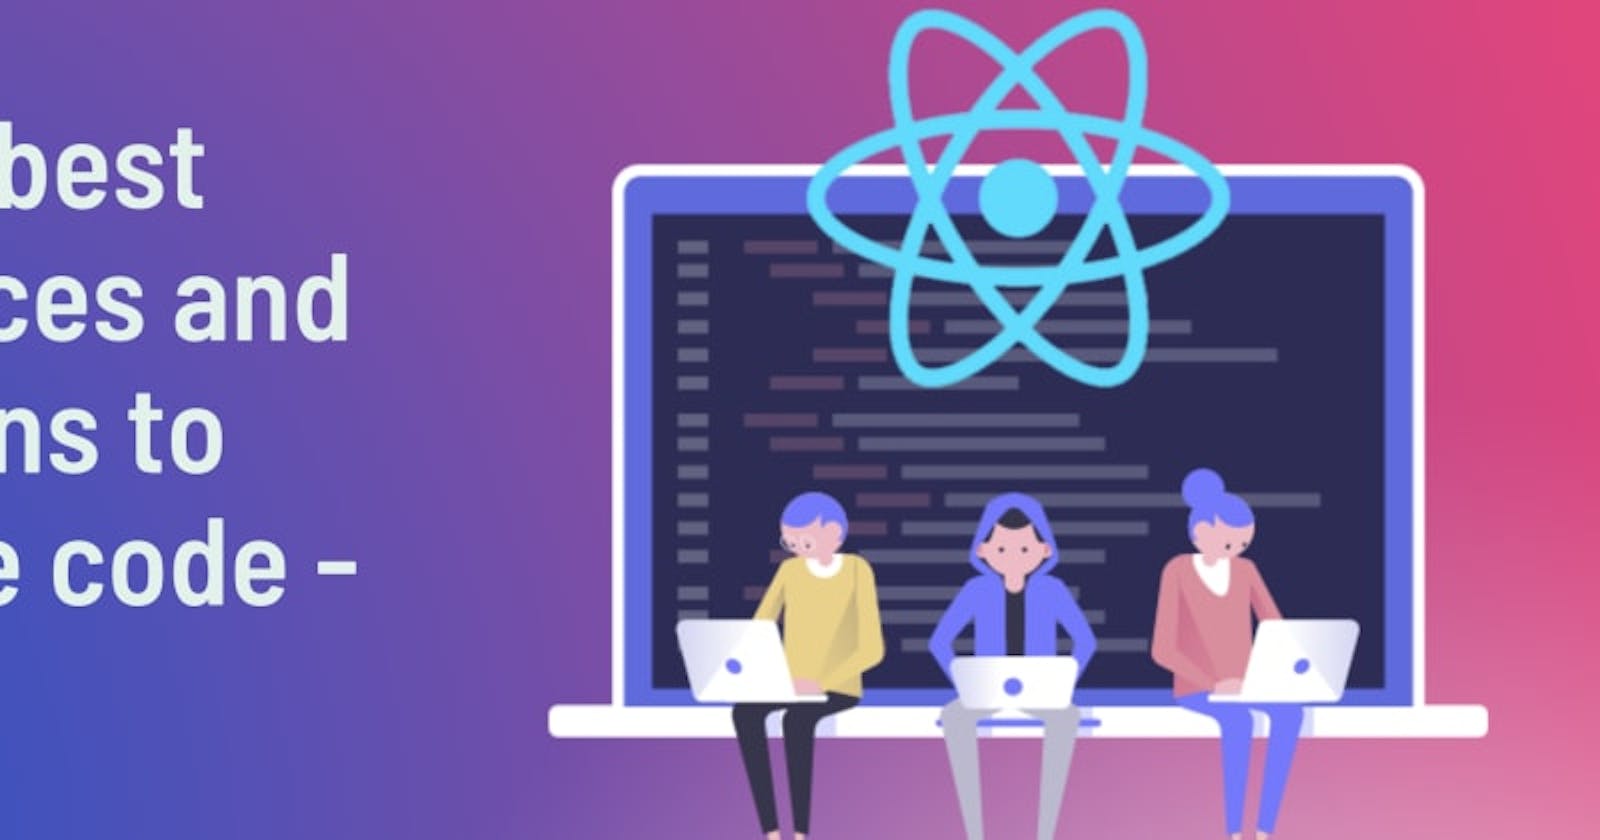 React best practices and patterns to reduce code - Part 2